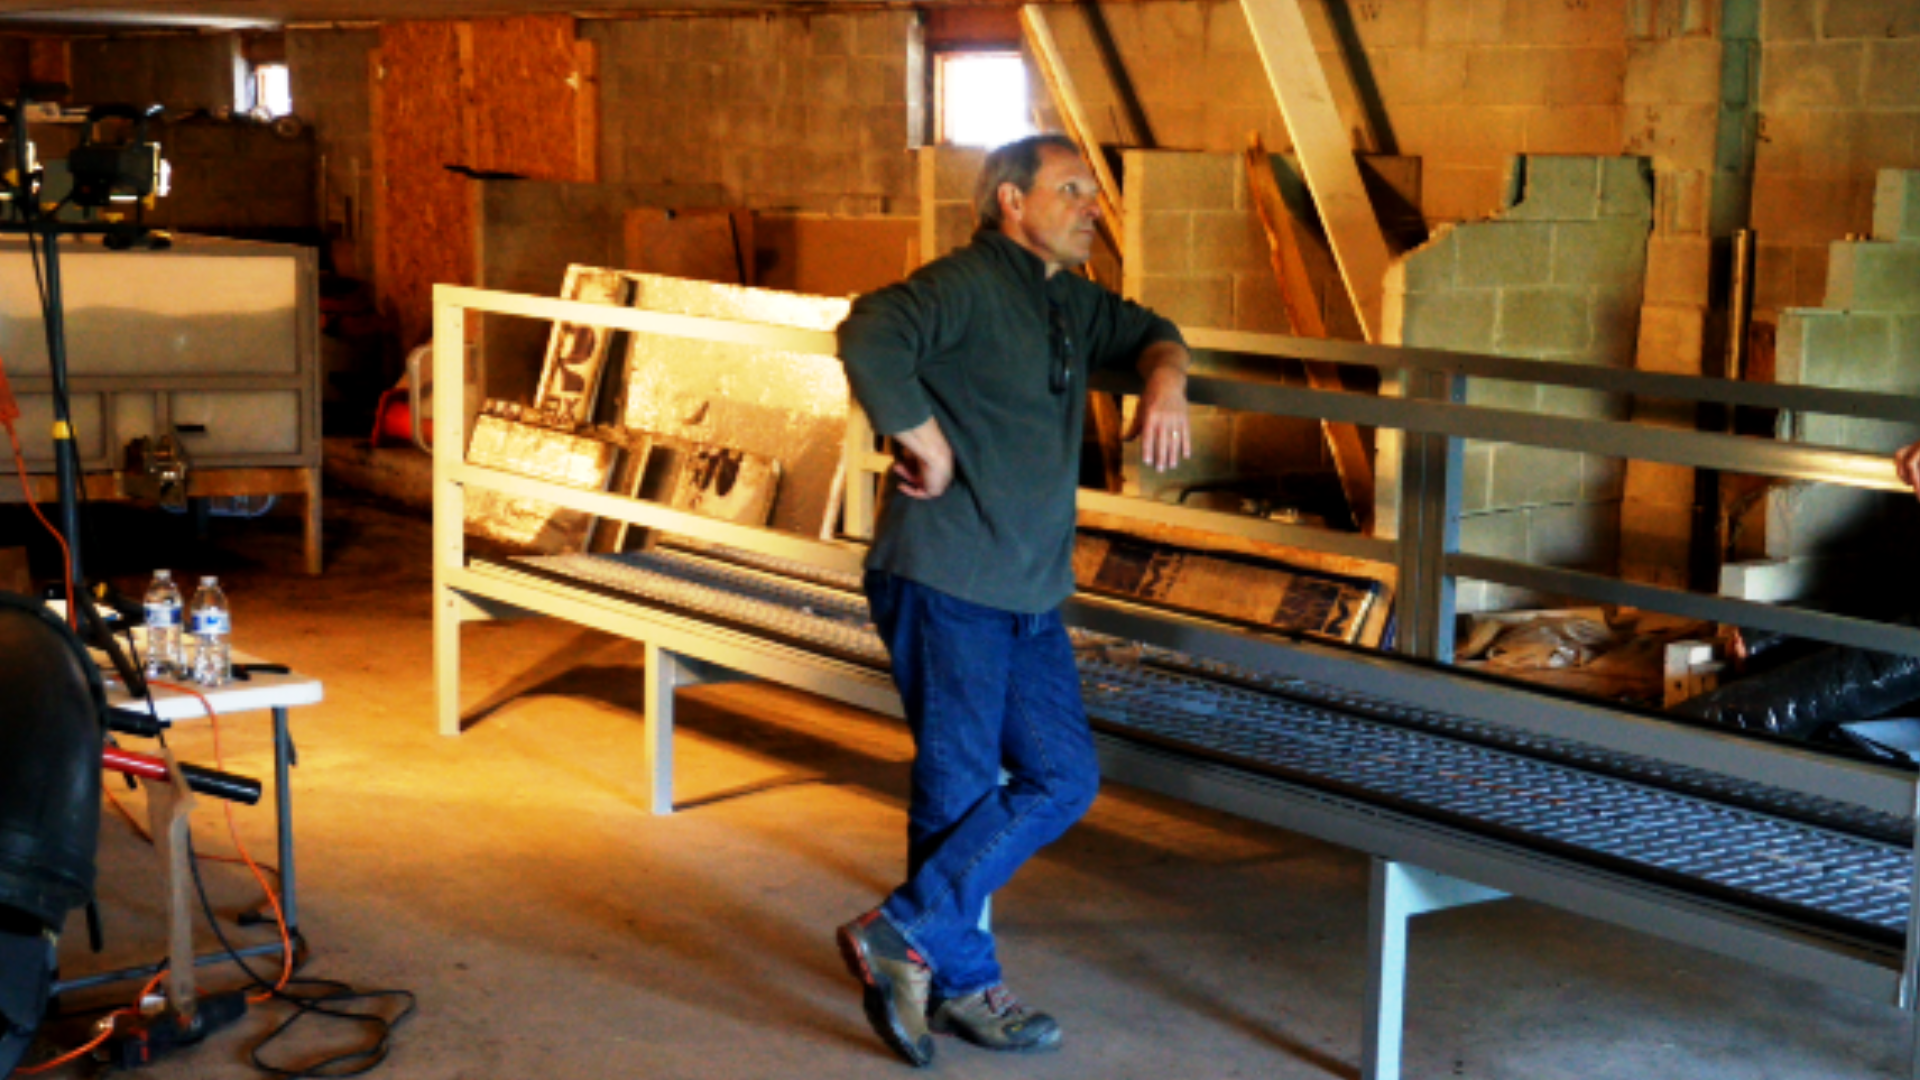 Image showing Dan Lonowski standing beside a partially constructed Wormgear continuous flow-through (CFT) composting system, inside a work-in-progress building with construction and agricultural equipment around.